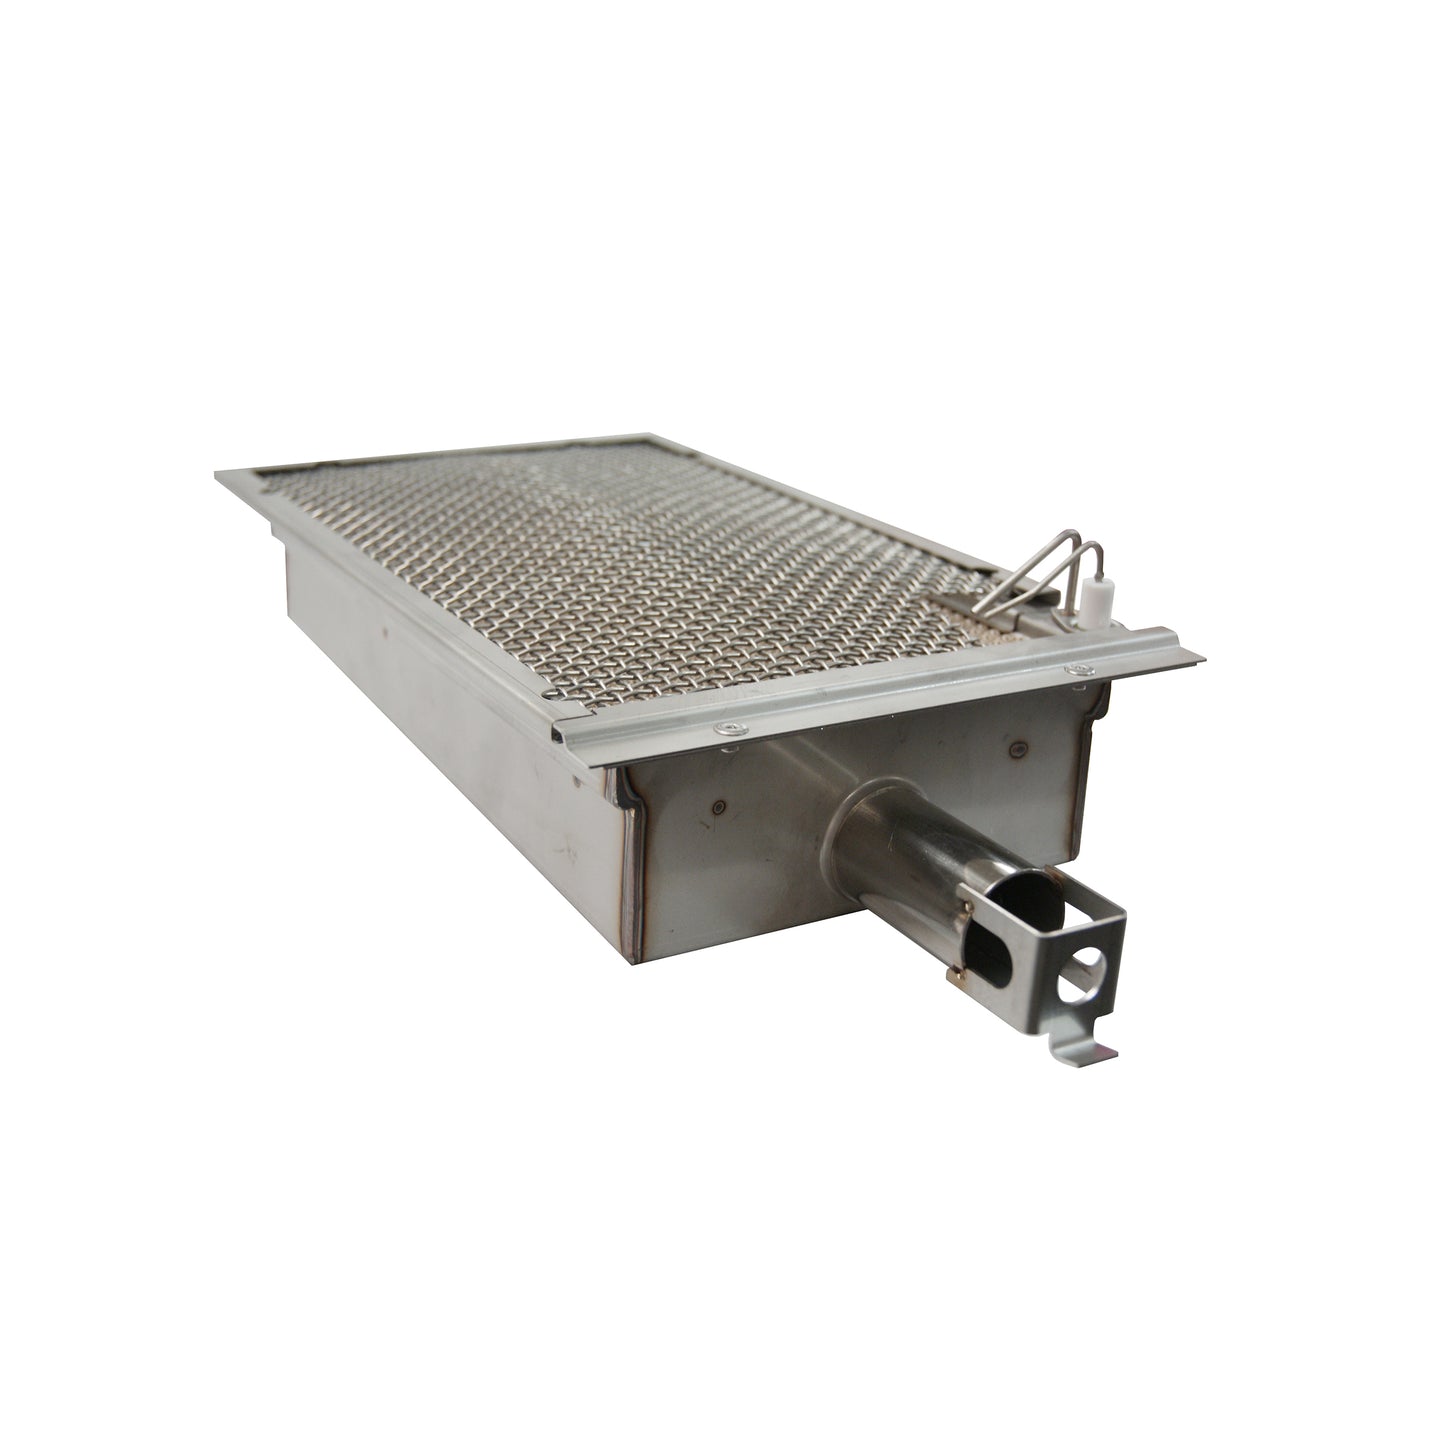 American Outdoor Grill (AOG) Infra-Red Burner System (for “L” Model Grills only) IRB-18